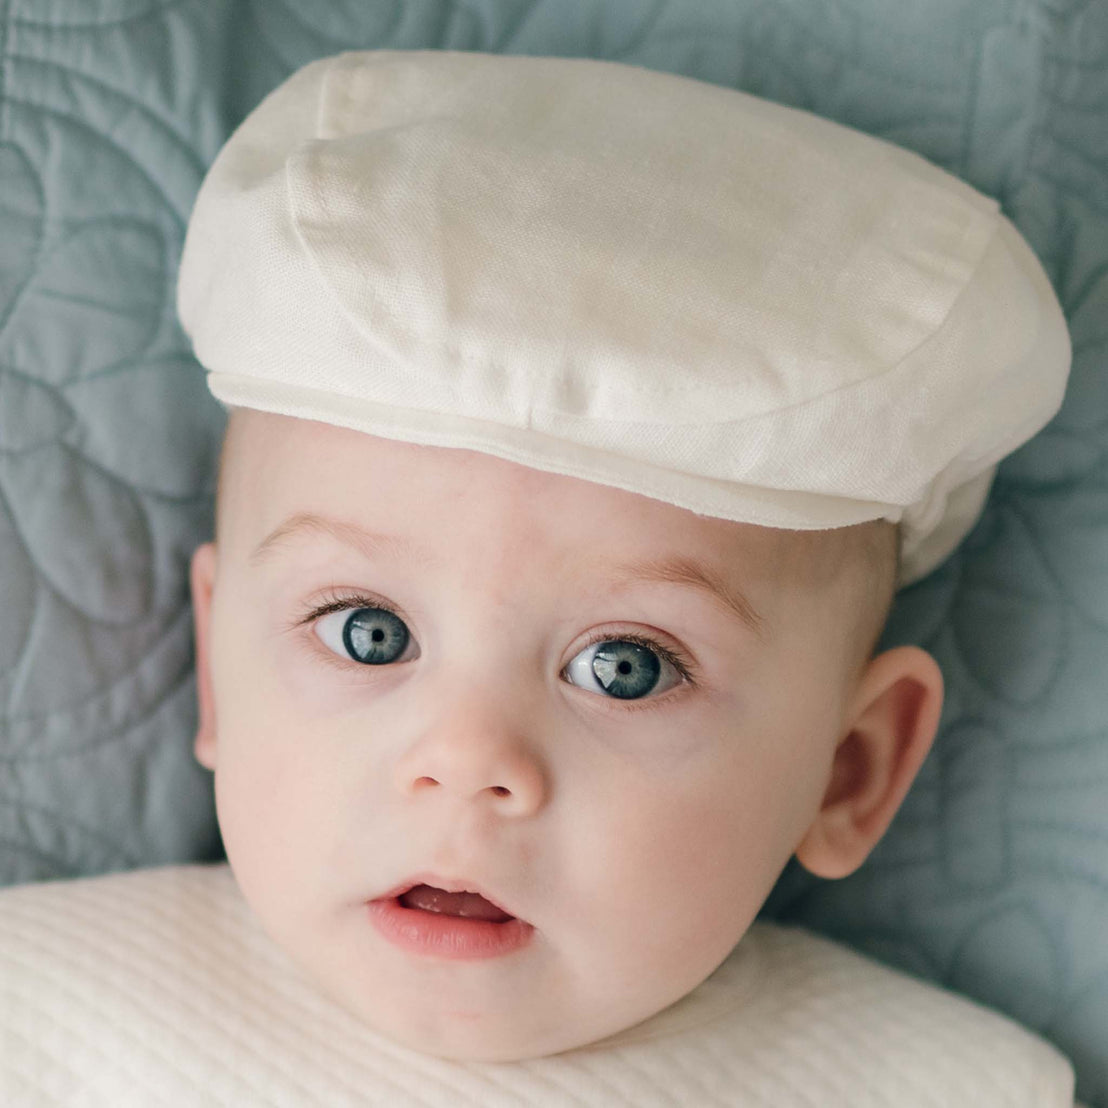 A baby with blue eyes is looking at the camera, wearing a handmade white christening outfit and an Oliver Linen Newsboy Cap. The background appears to be a textured fabric.